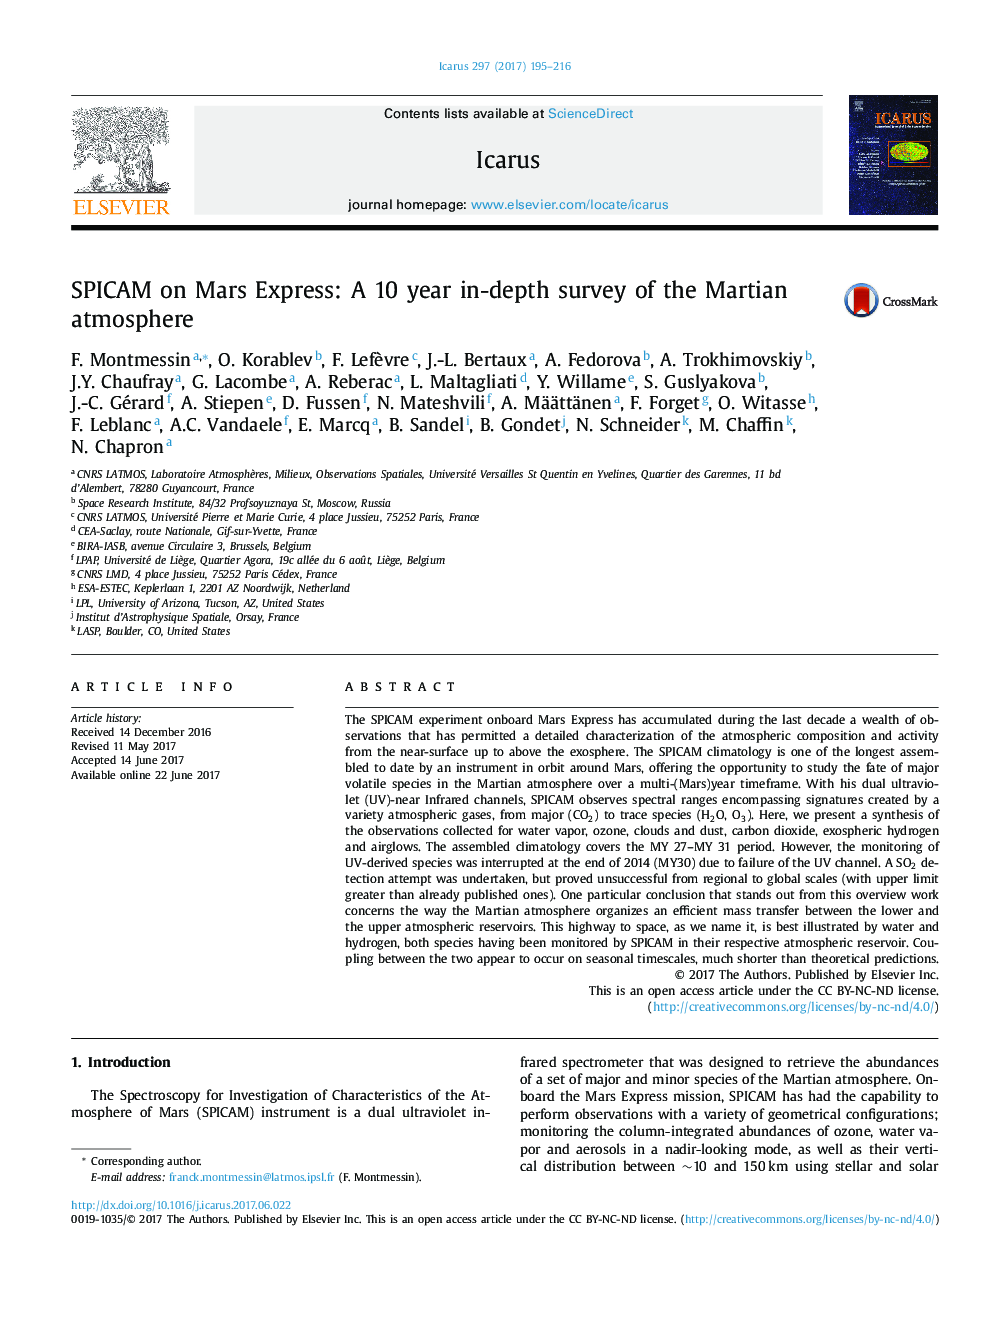 SPICAM on Mars Express: A 10 year in-depth survey of the Martian atmosphere